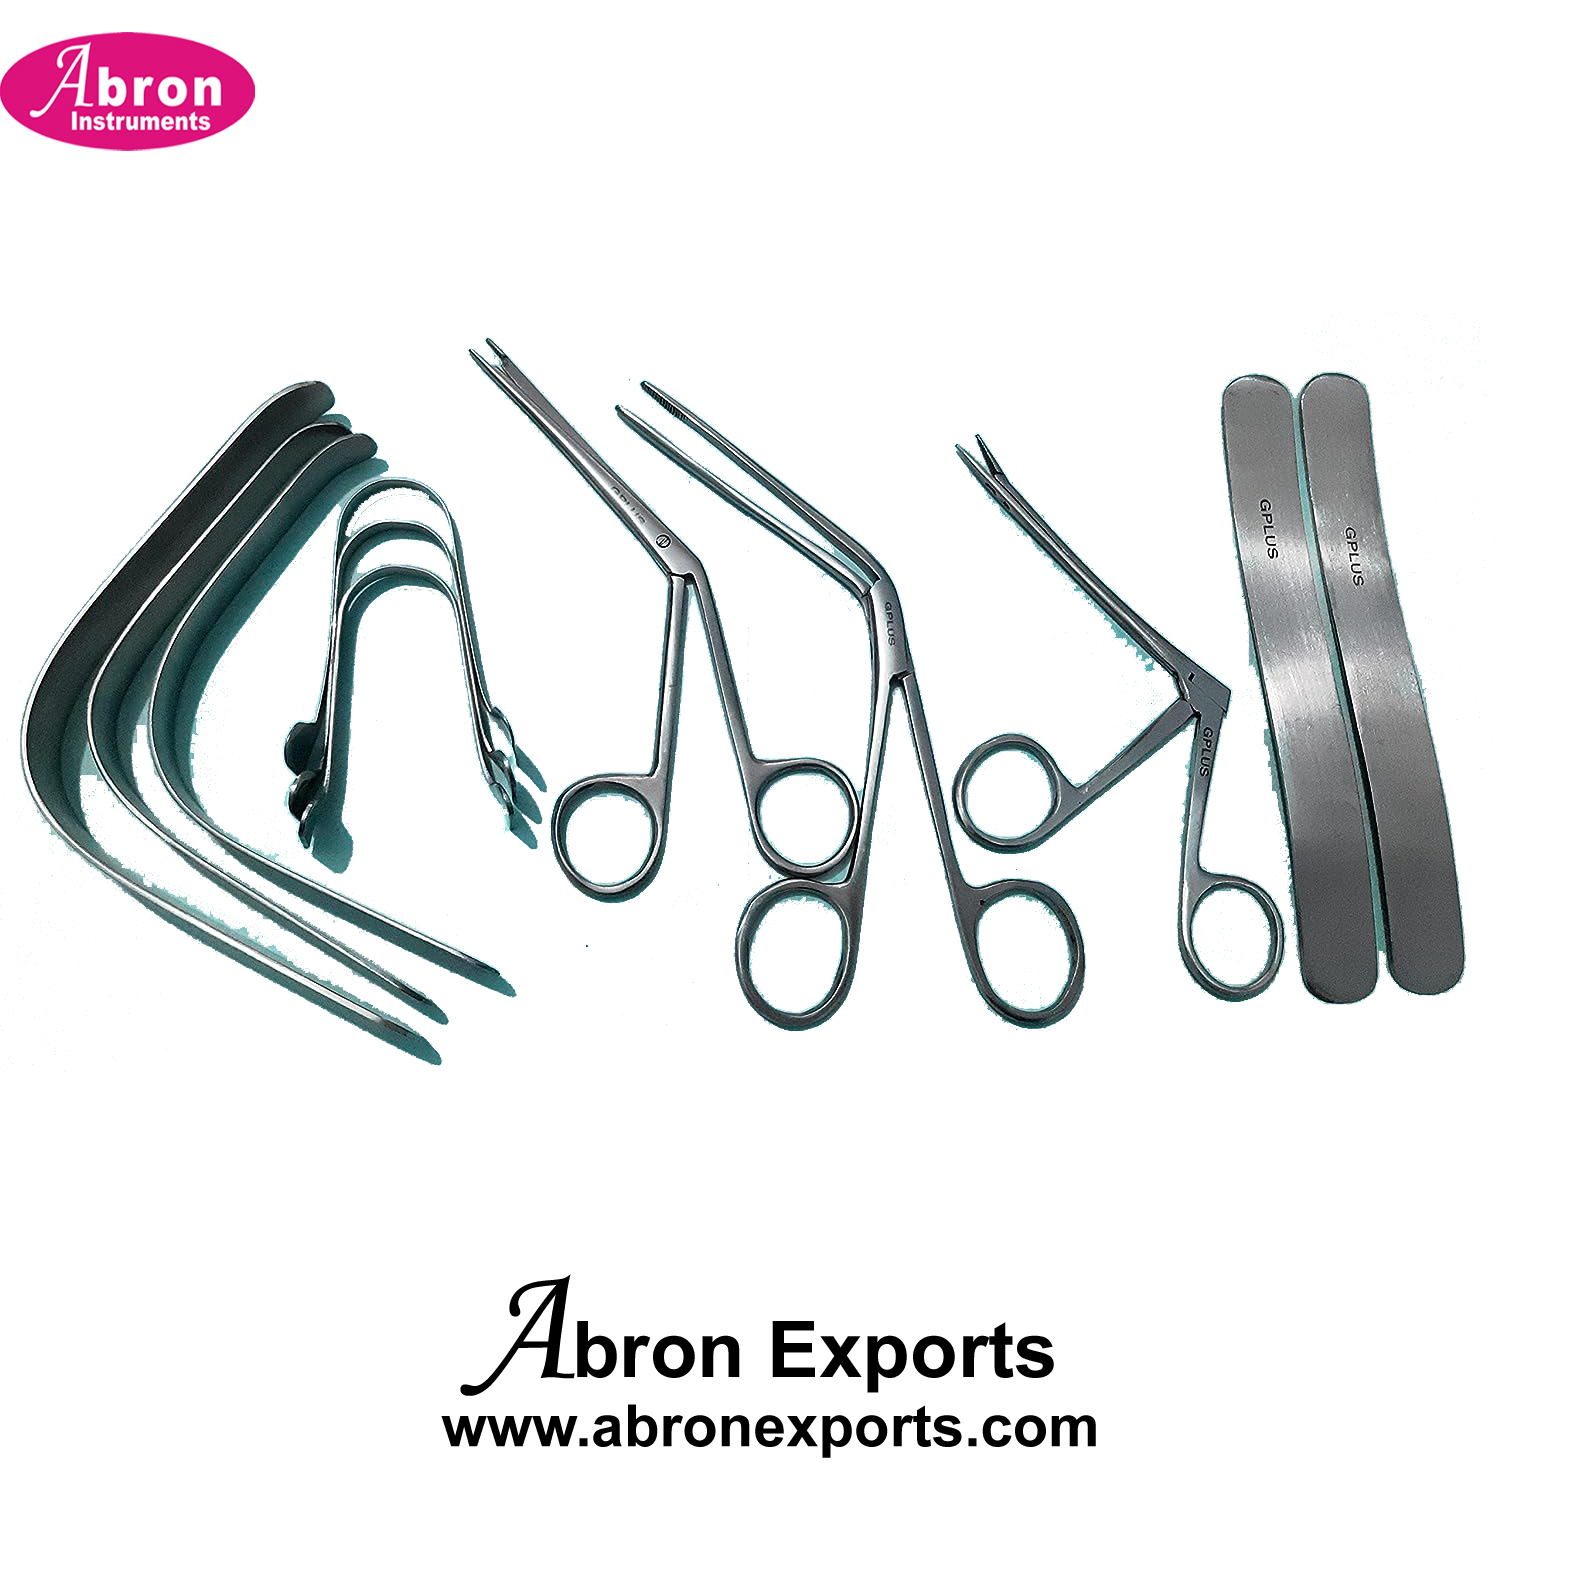 ENT Surgical Instruments set  of 6 Stainless steel Abron ABM-1504A6 